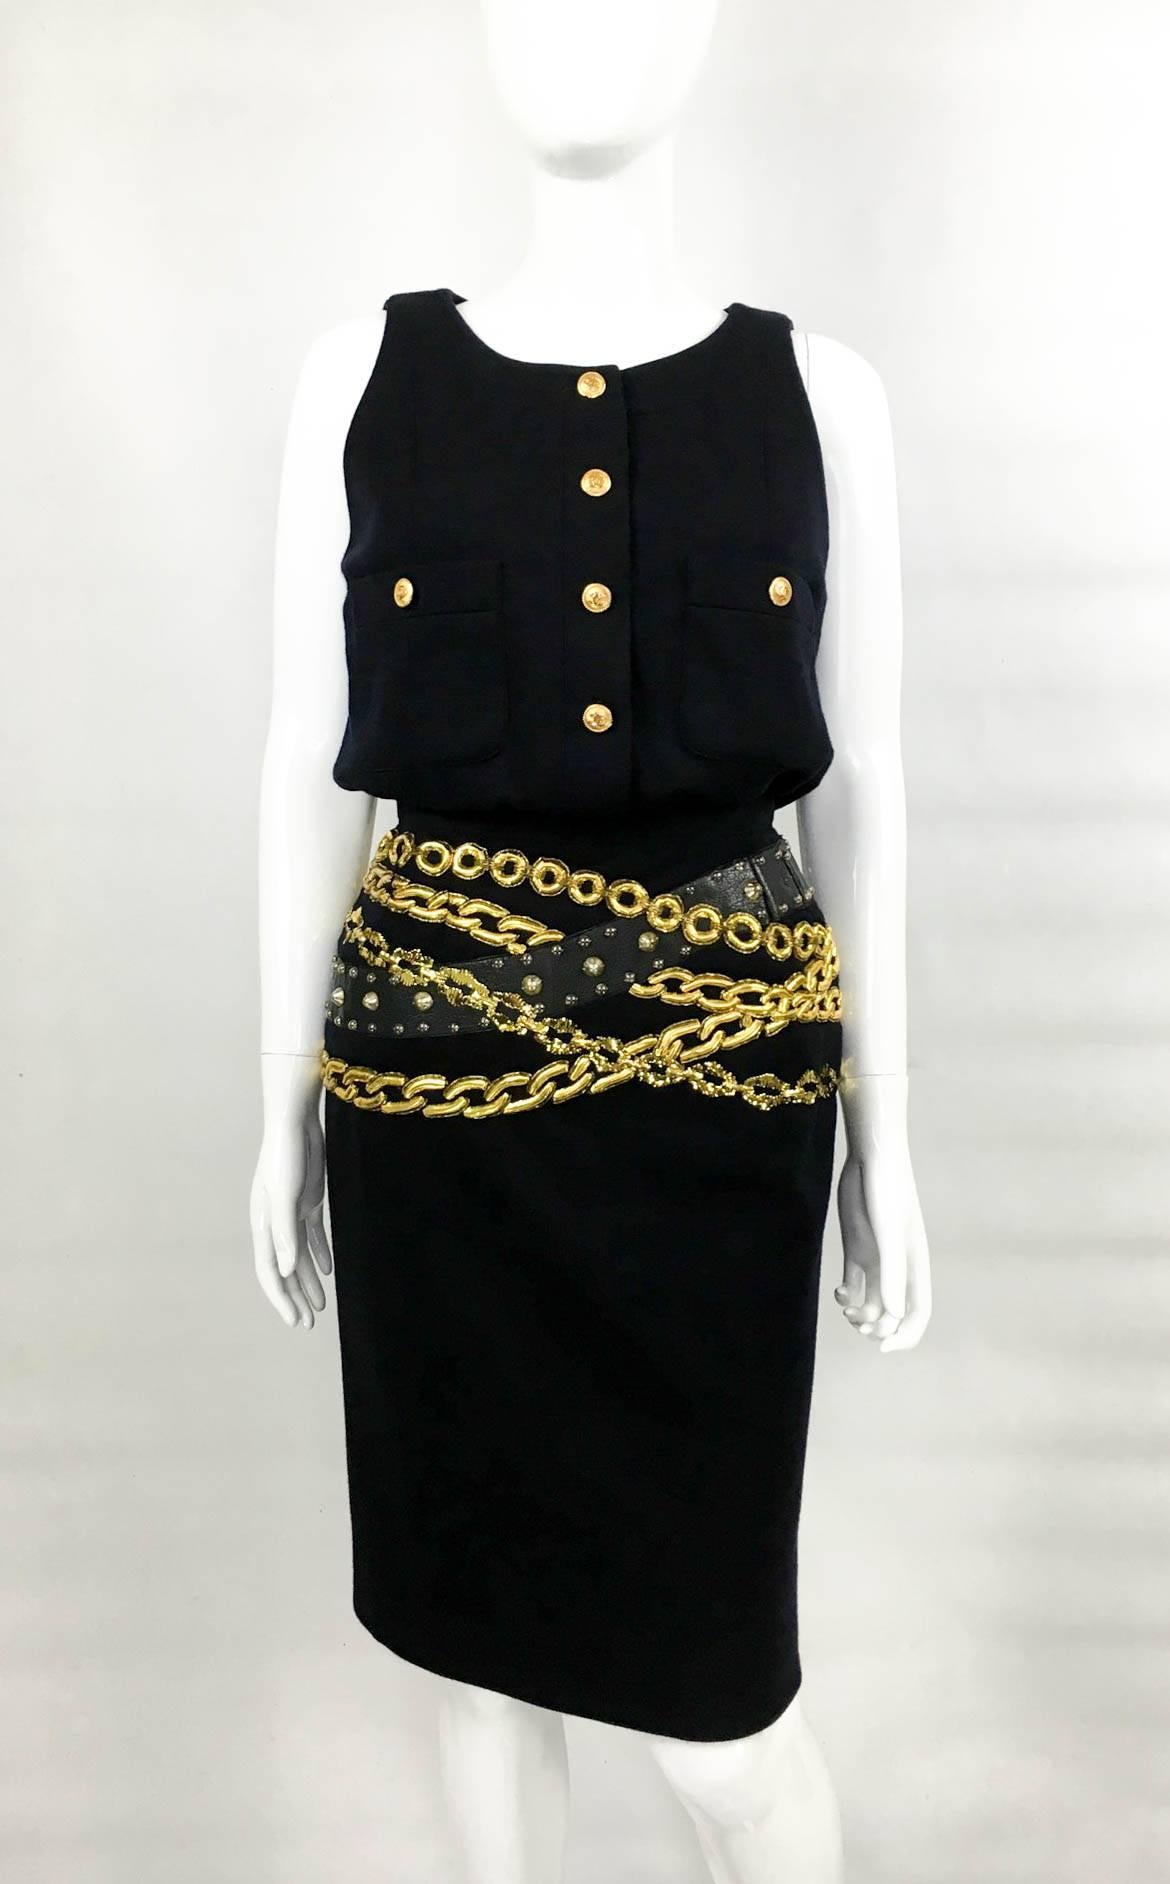 Chanel 'Chain' Wool Black Dress - Circa 1985 In Excellent Condition In London, Chelsea